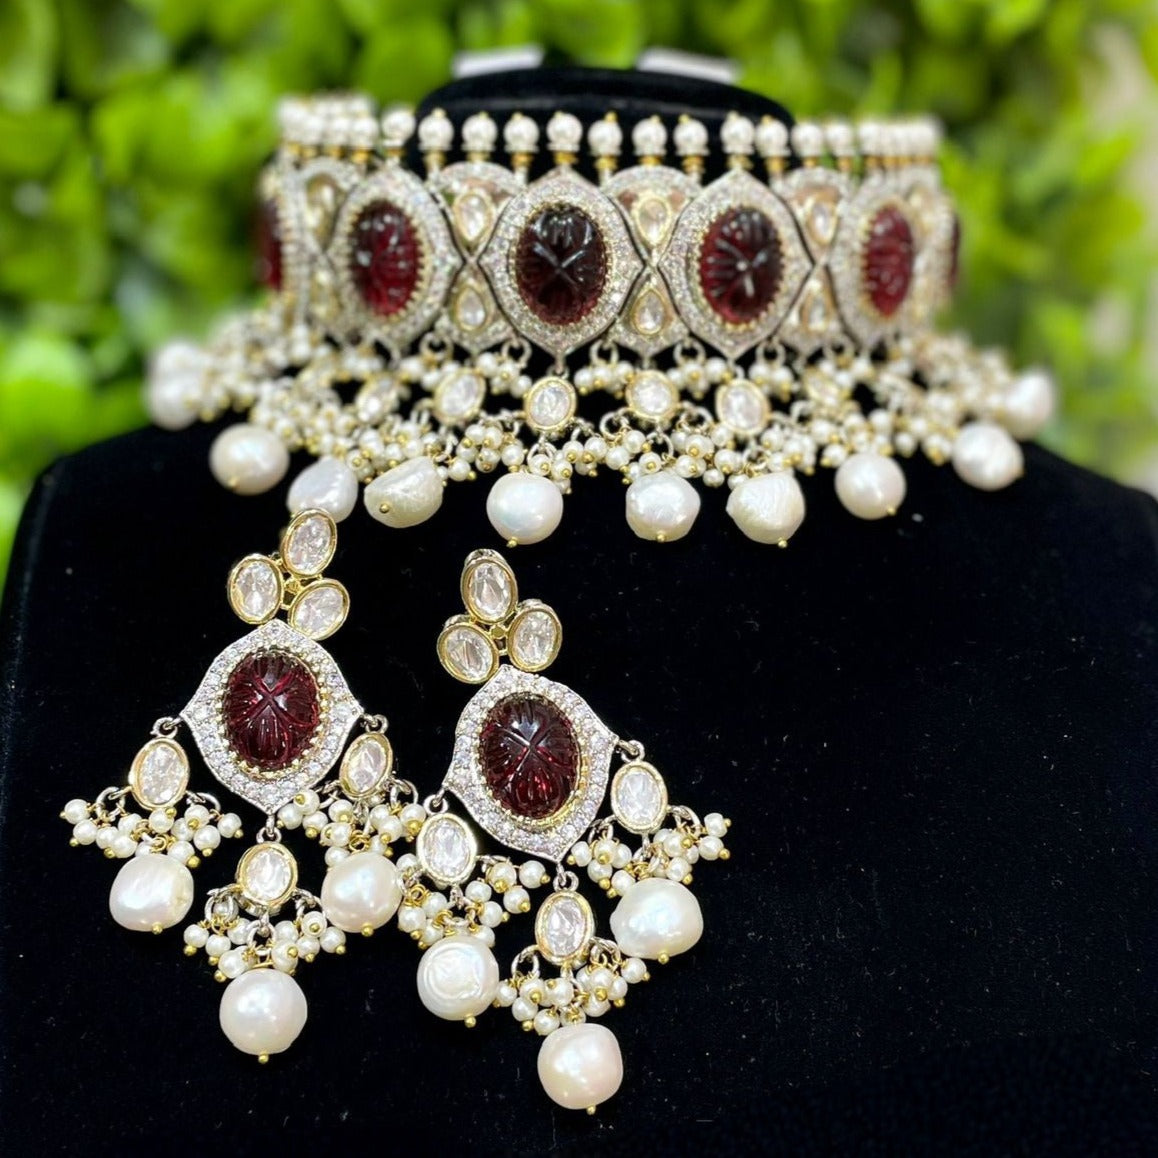 Premium Quality Tyaani Necklace with Earrings and Tikka Jewellery Set